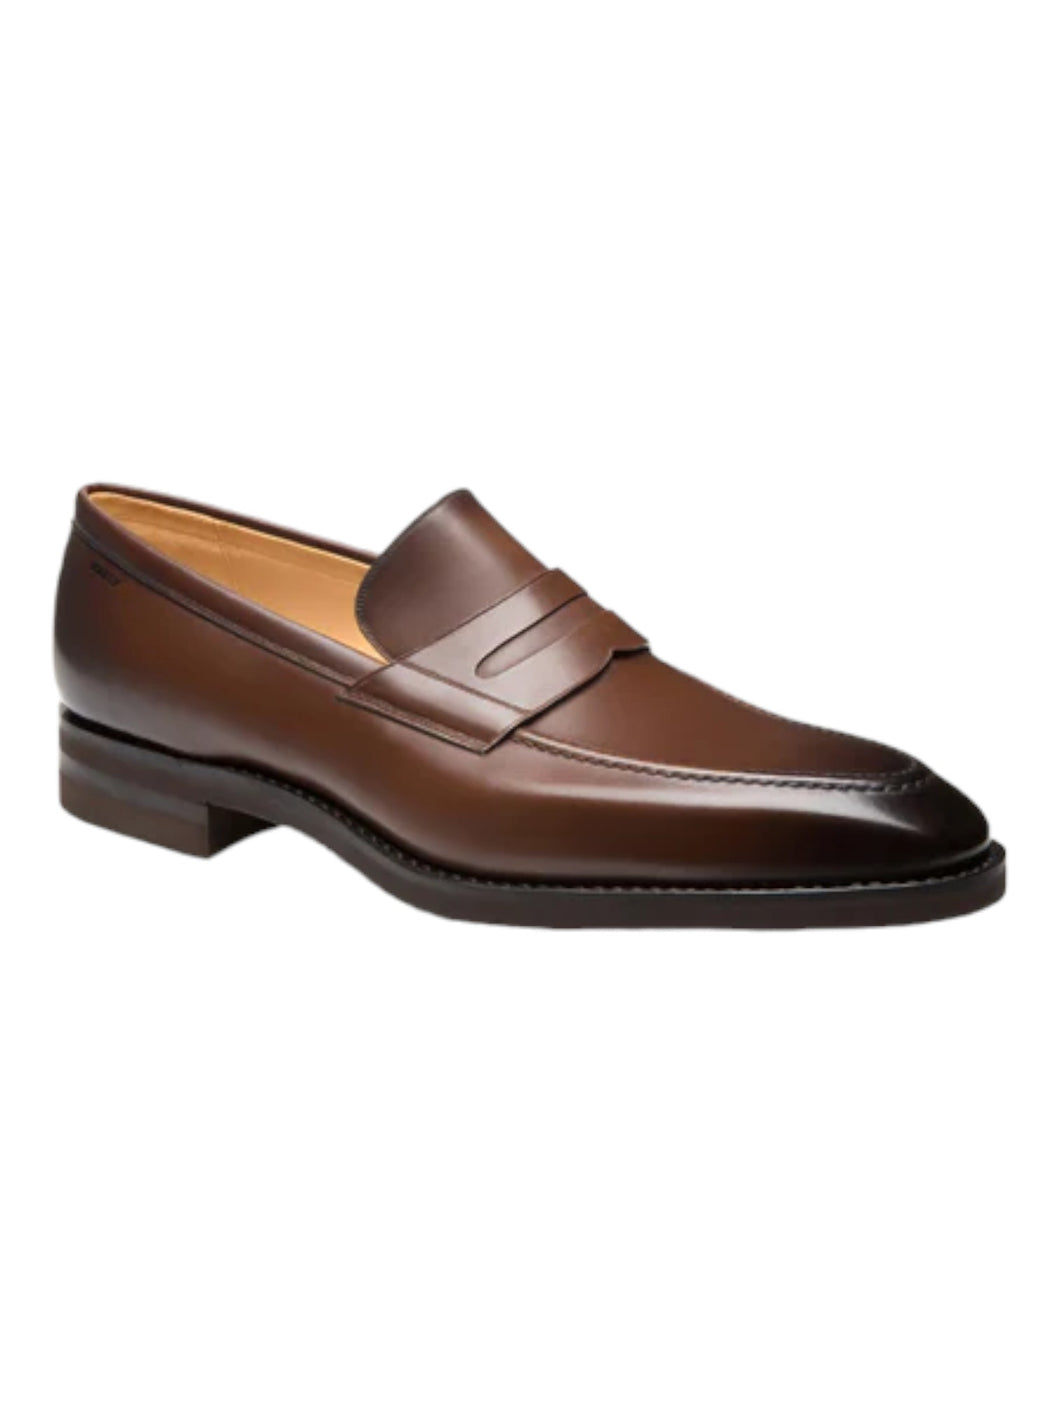 Bally Score 6203093 Men's Brown Leather Loafers MSRP $999